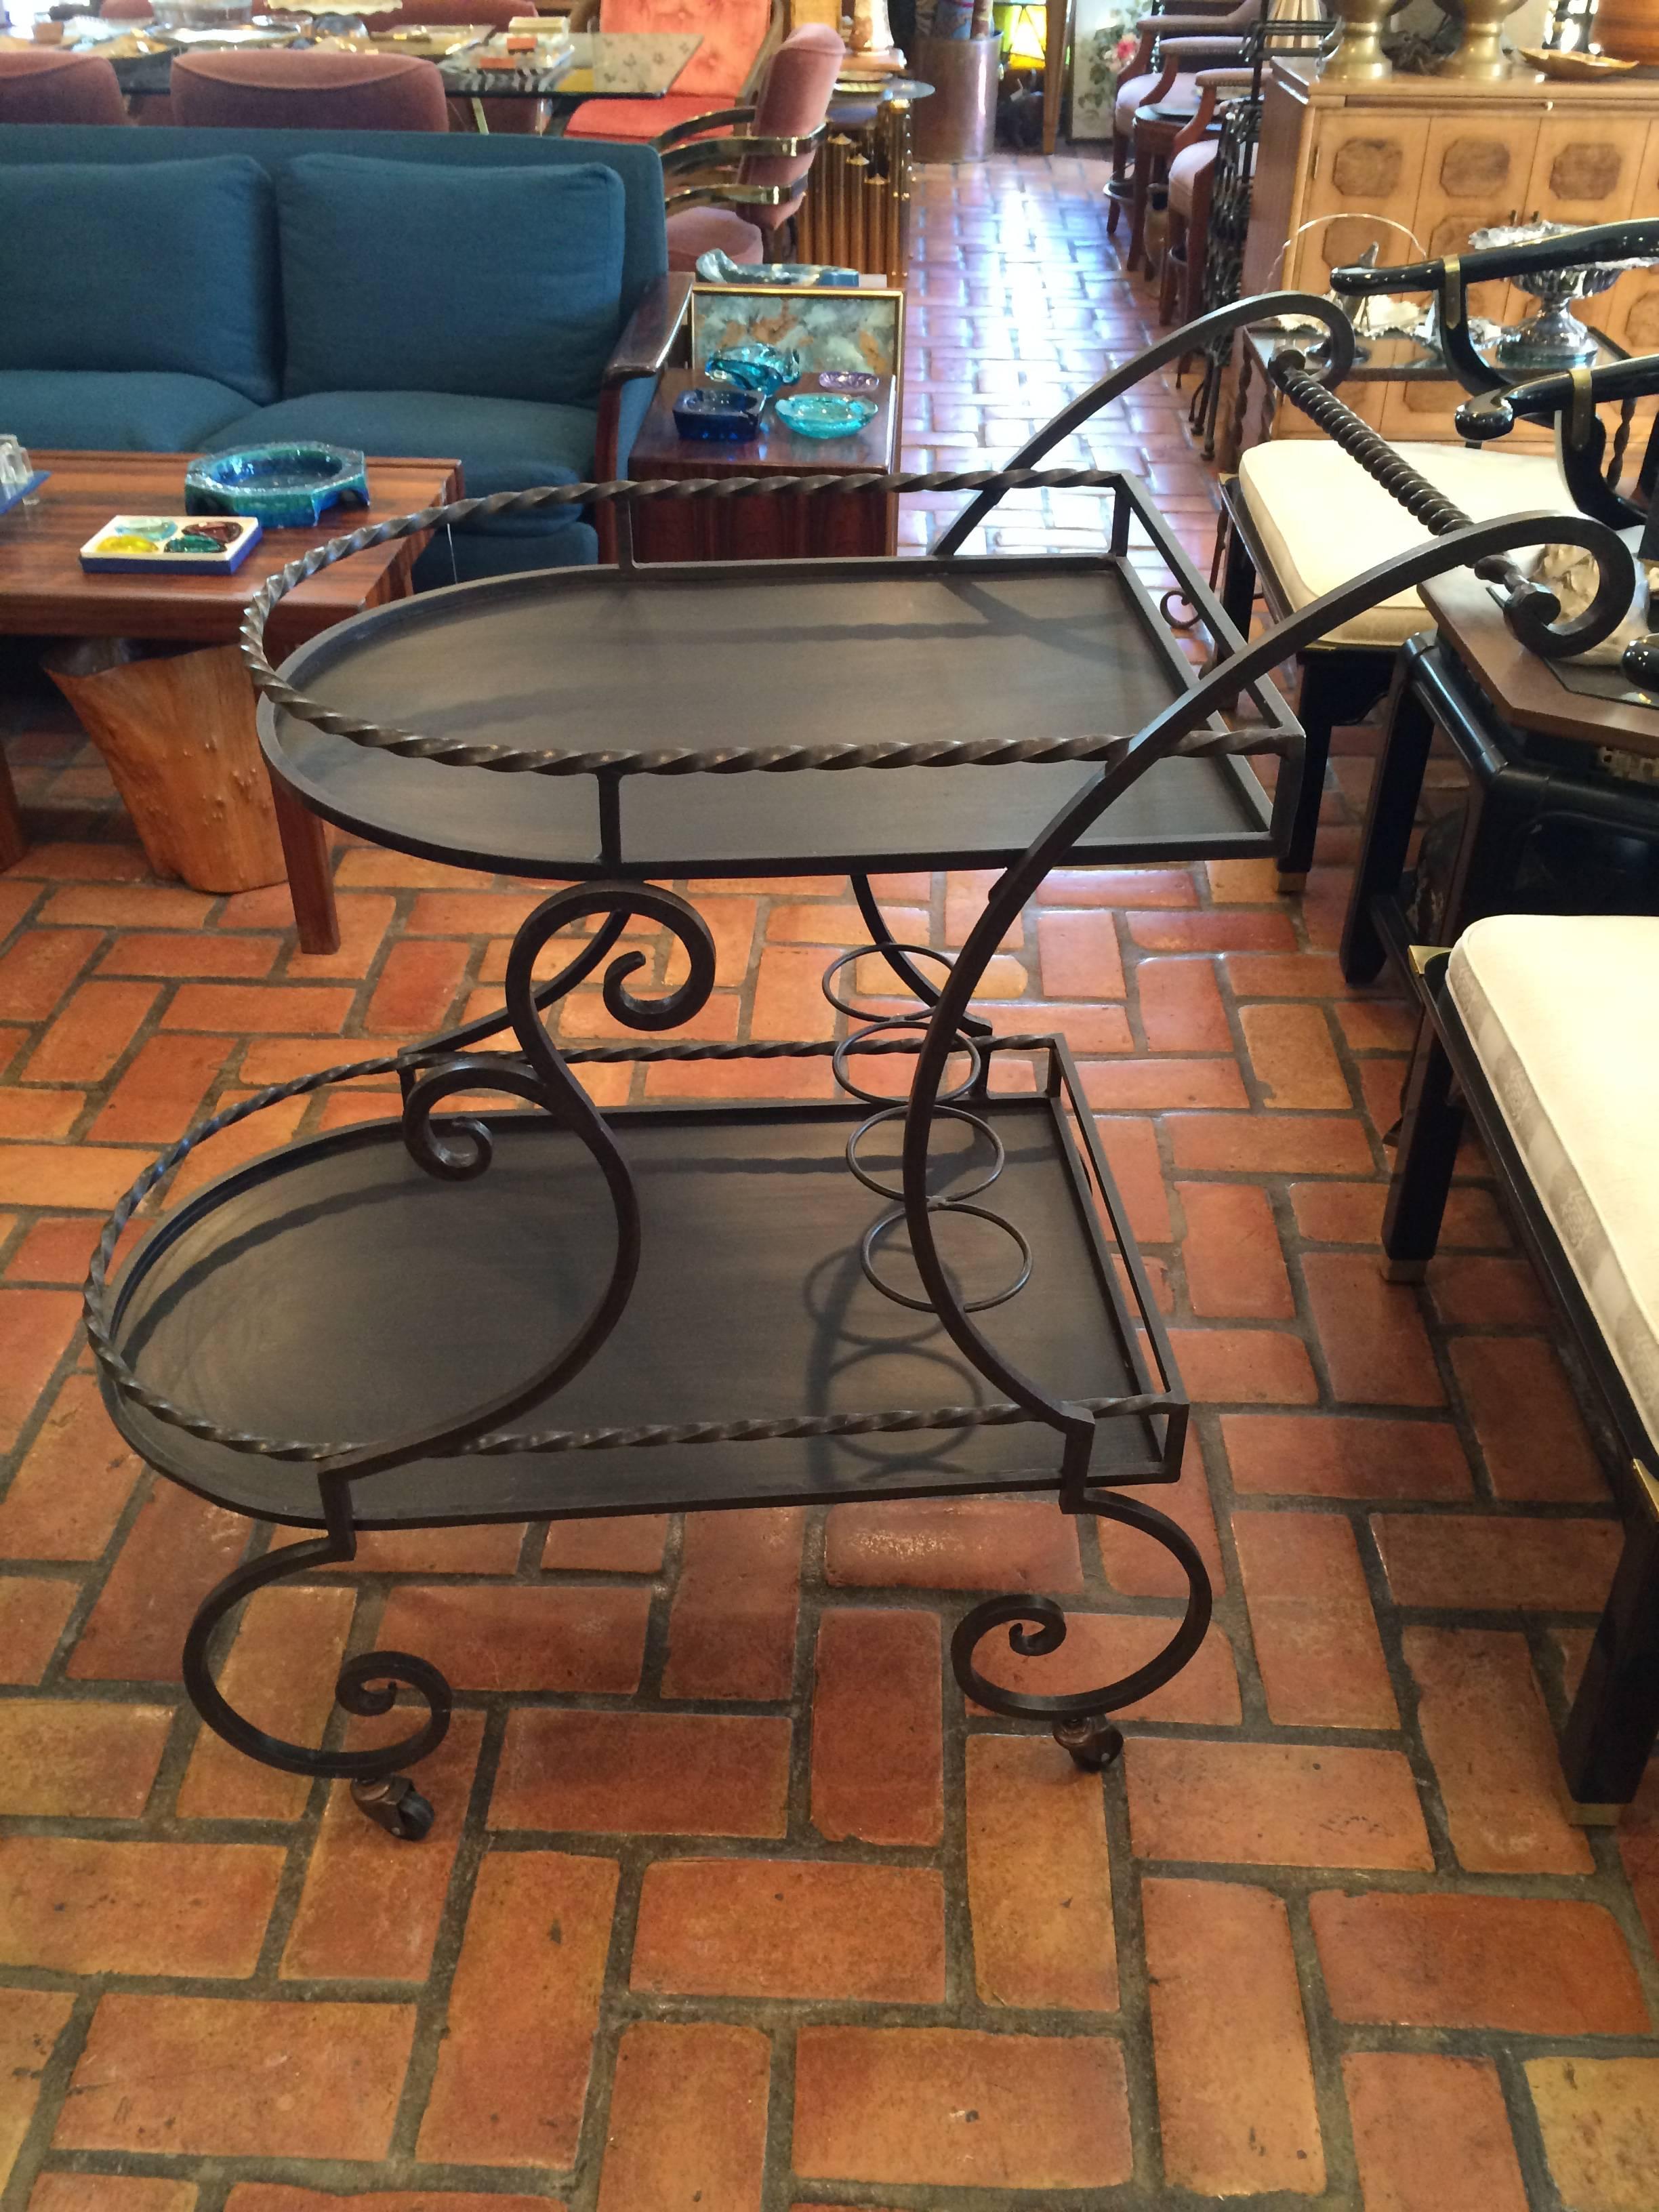 Wrought iron rolling tea or bar cart. Perfect for that afternoon tea on the porch. This elegant but sturdy cart has two tiers for food and drinks. It also has four bottle holders for a variety of refreshments.